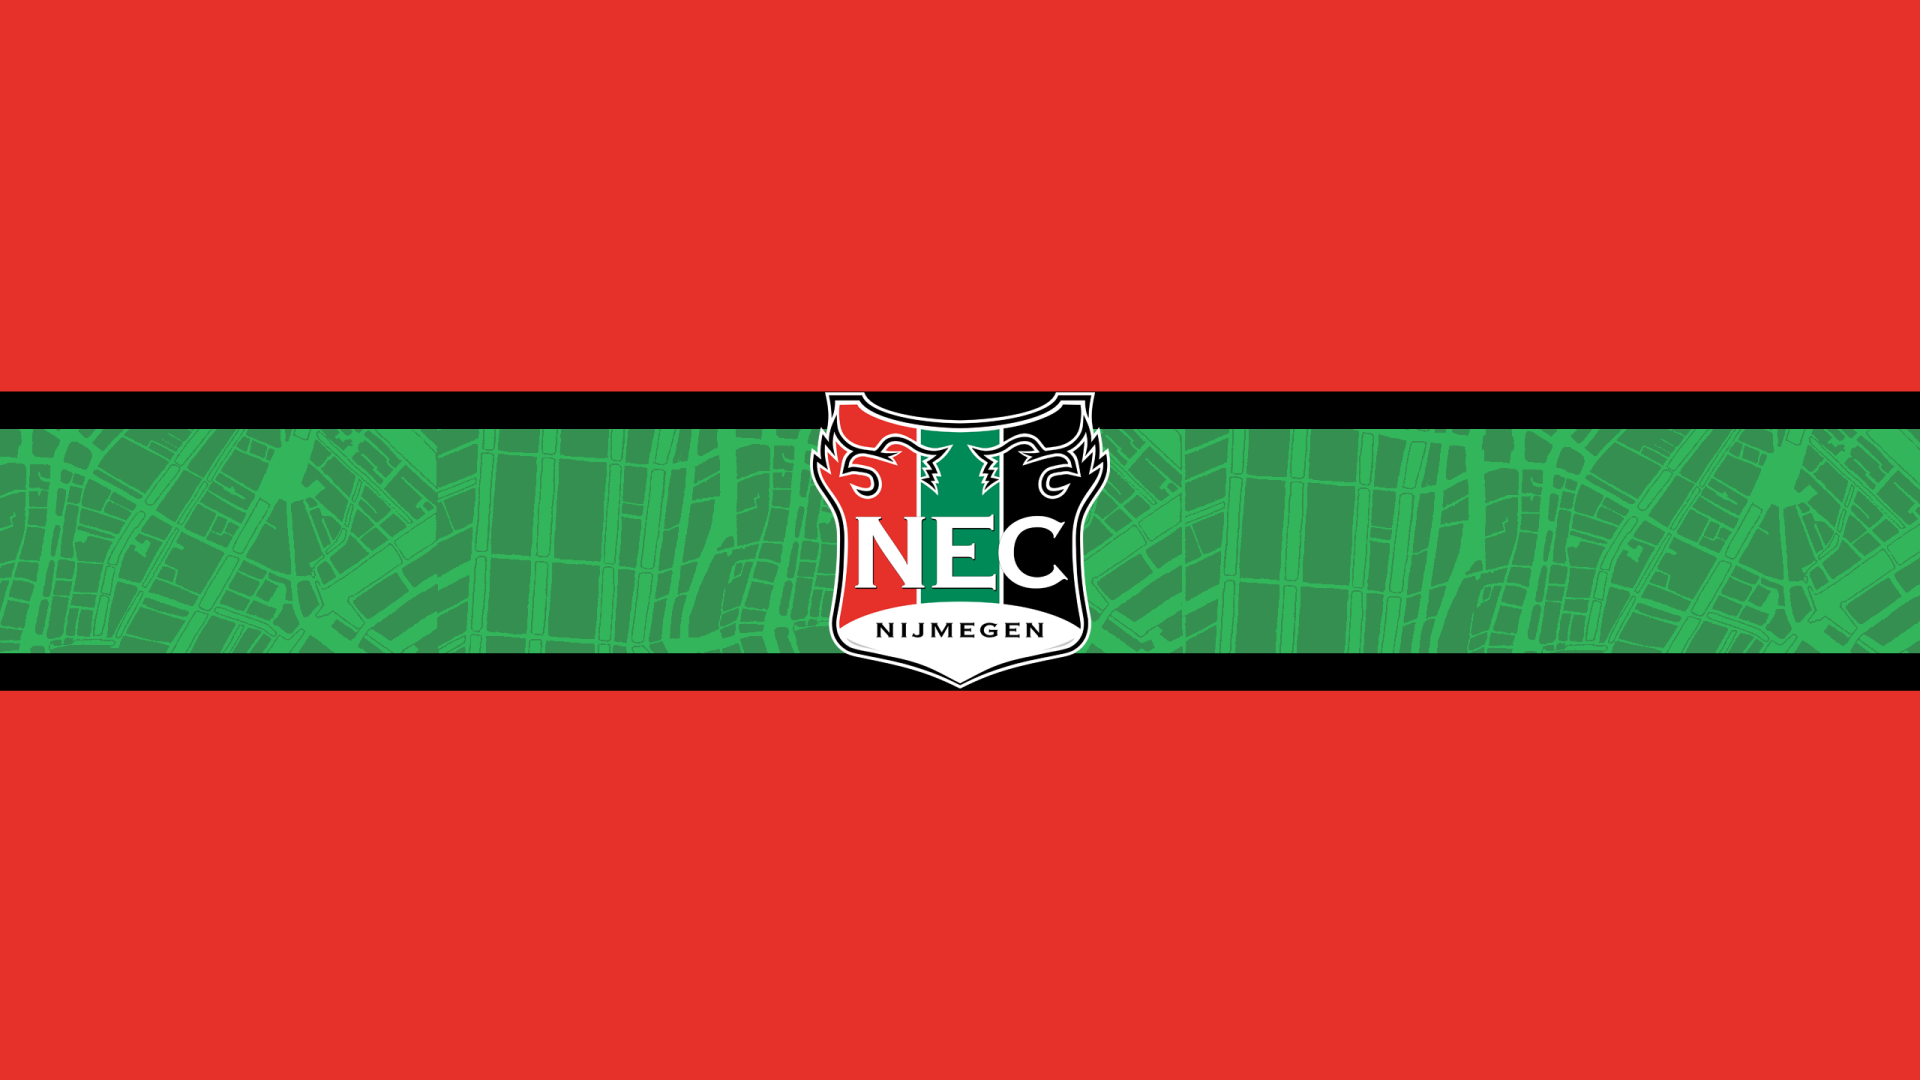 NEC Nijmegen HD Wallpapers And Backgrounds